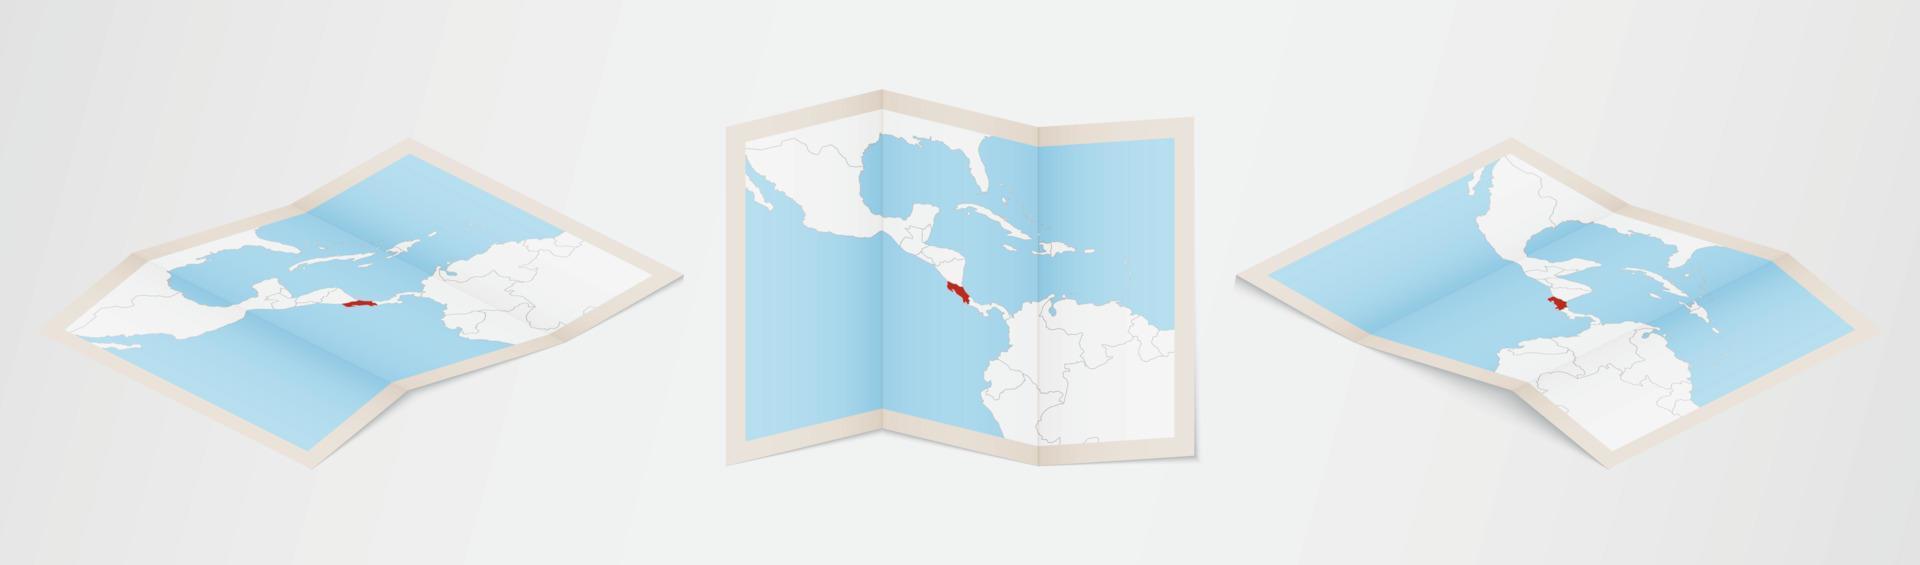 Folded map of Costa Rica in three different versions. vector